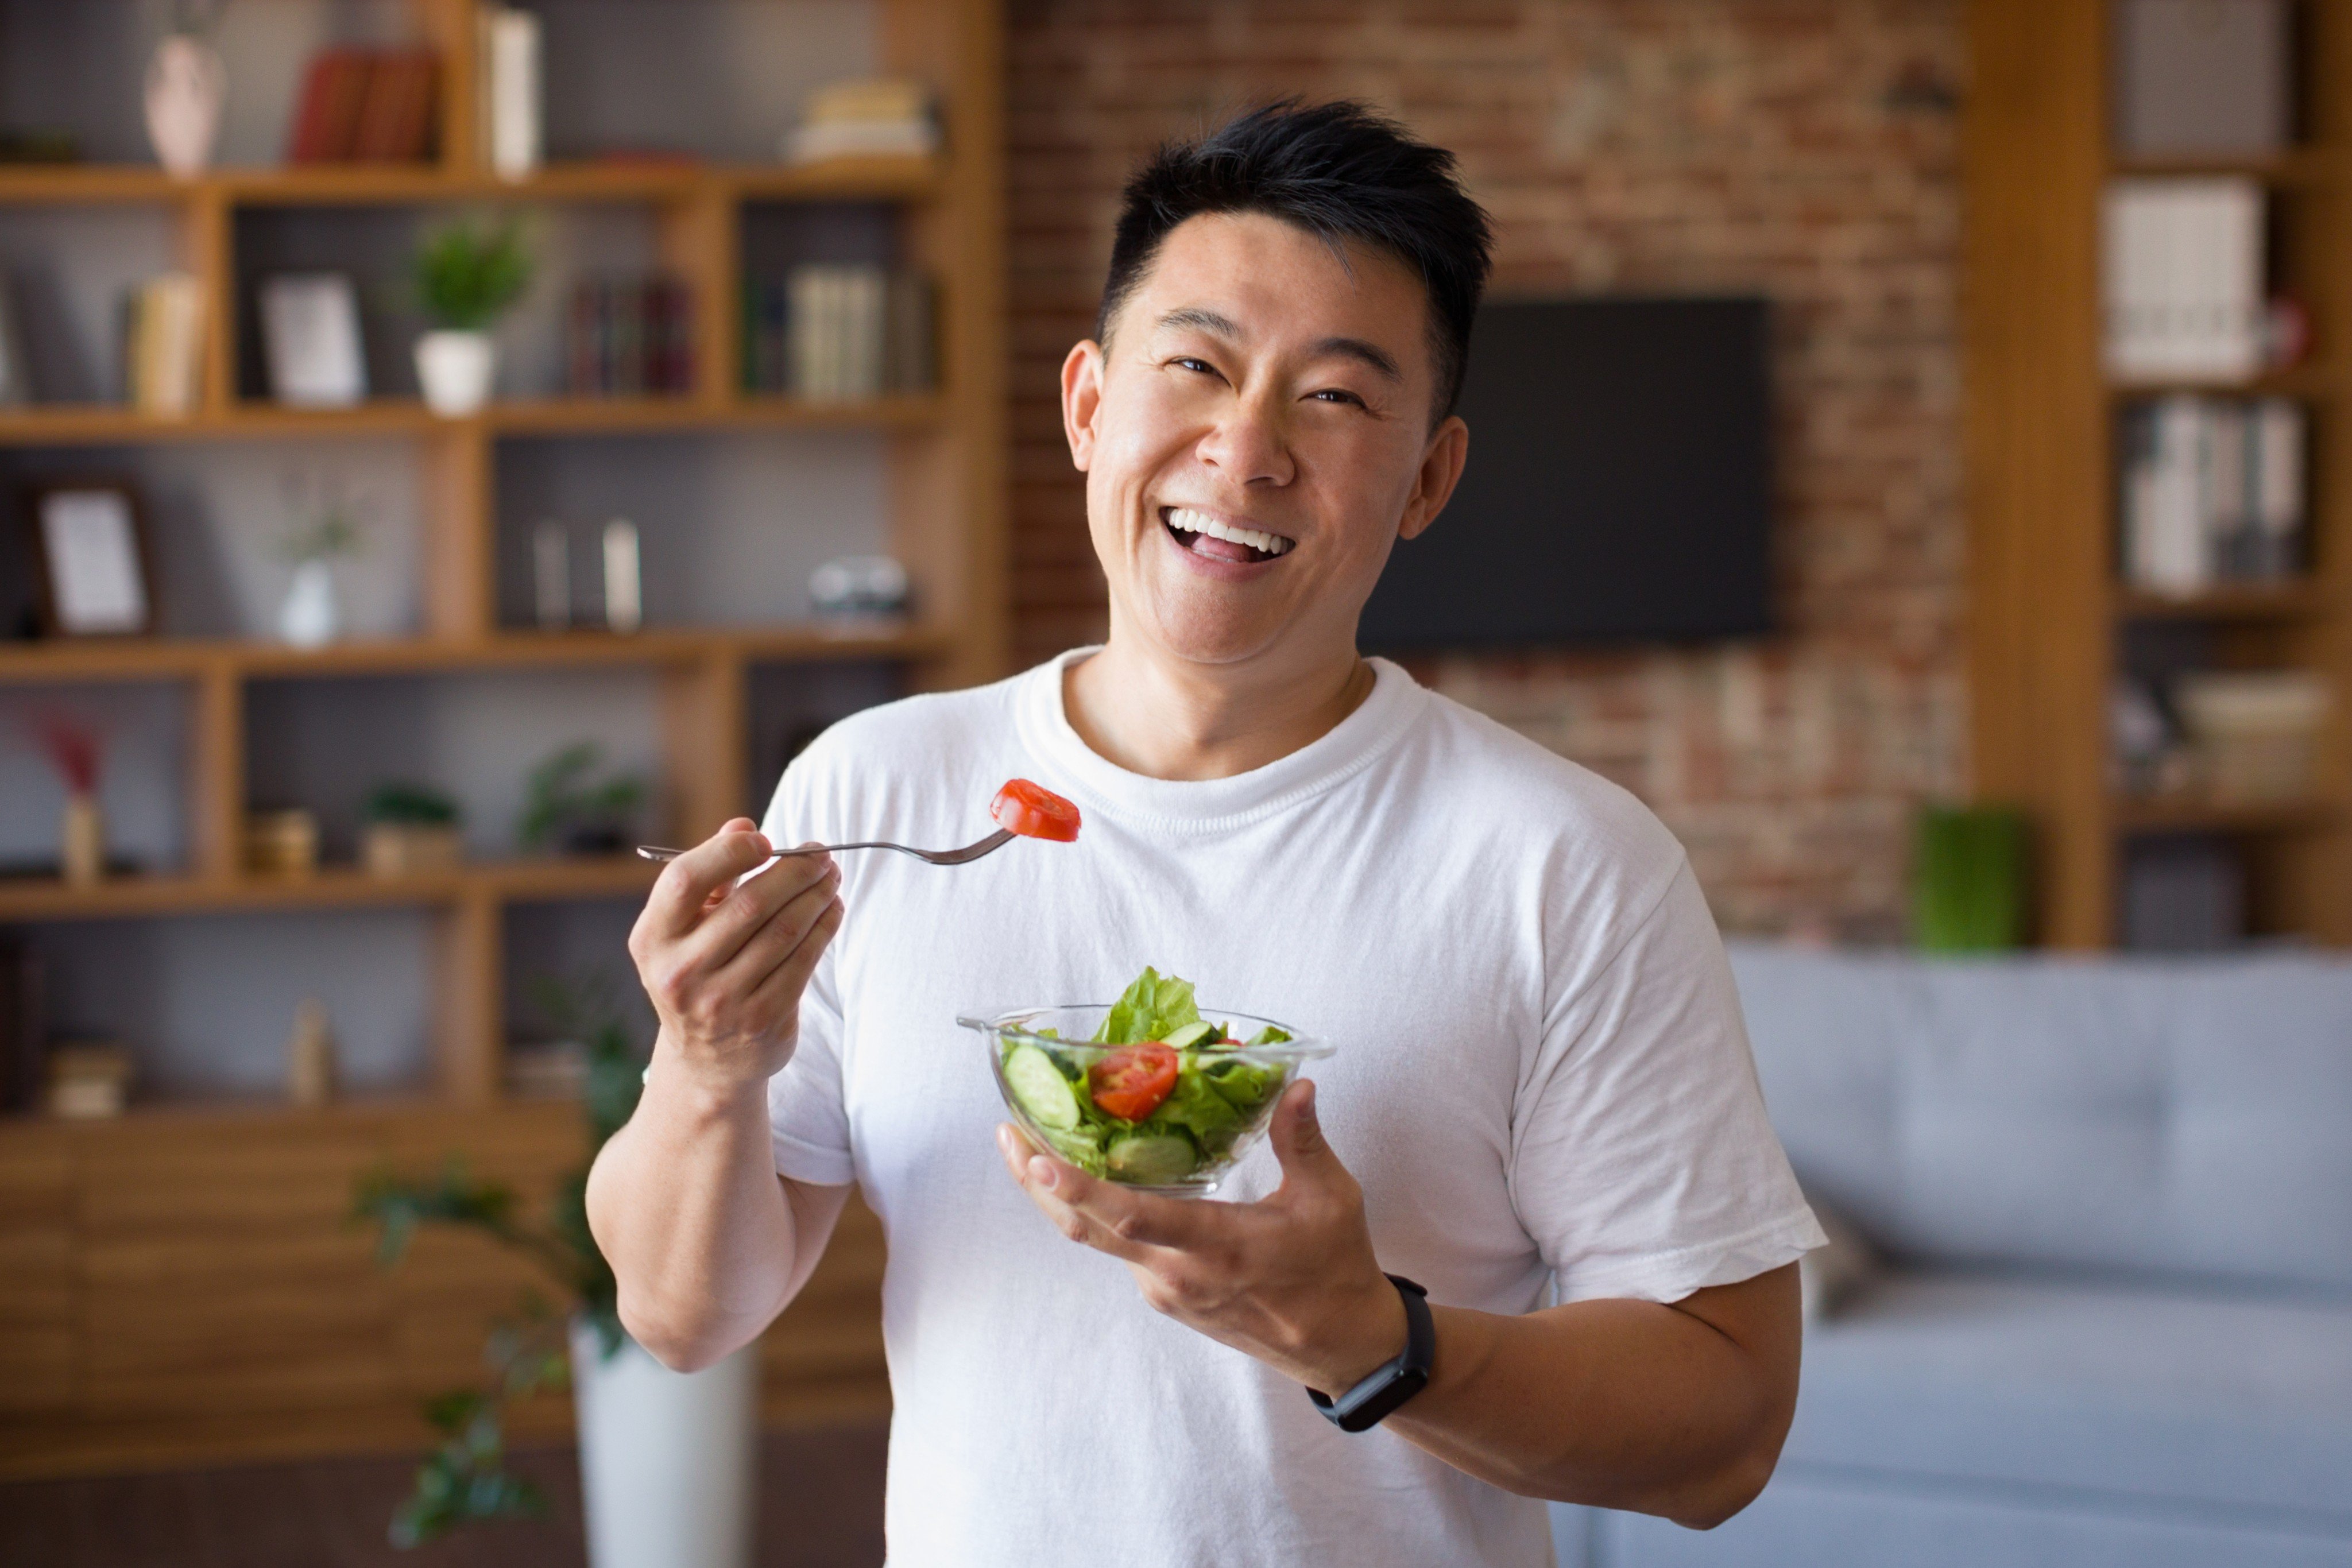 Hunger is physiological – the result of our brain signaling the need for fuel for our body – while appetite is the desire to eat. We delve deeper into the differences between the two, and give tips on appetite management. Photo: Shutterstock